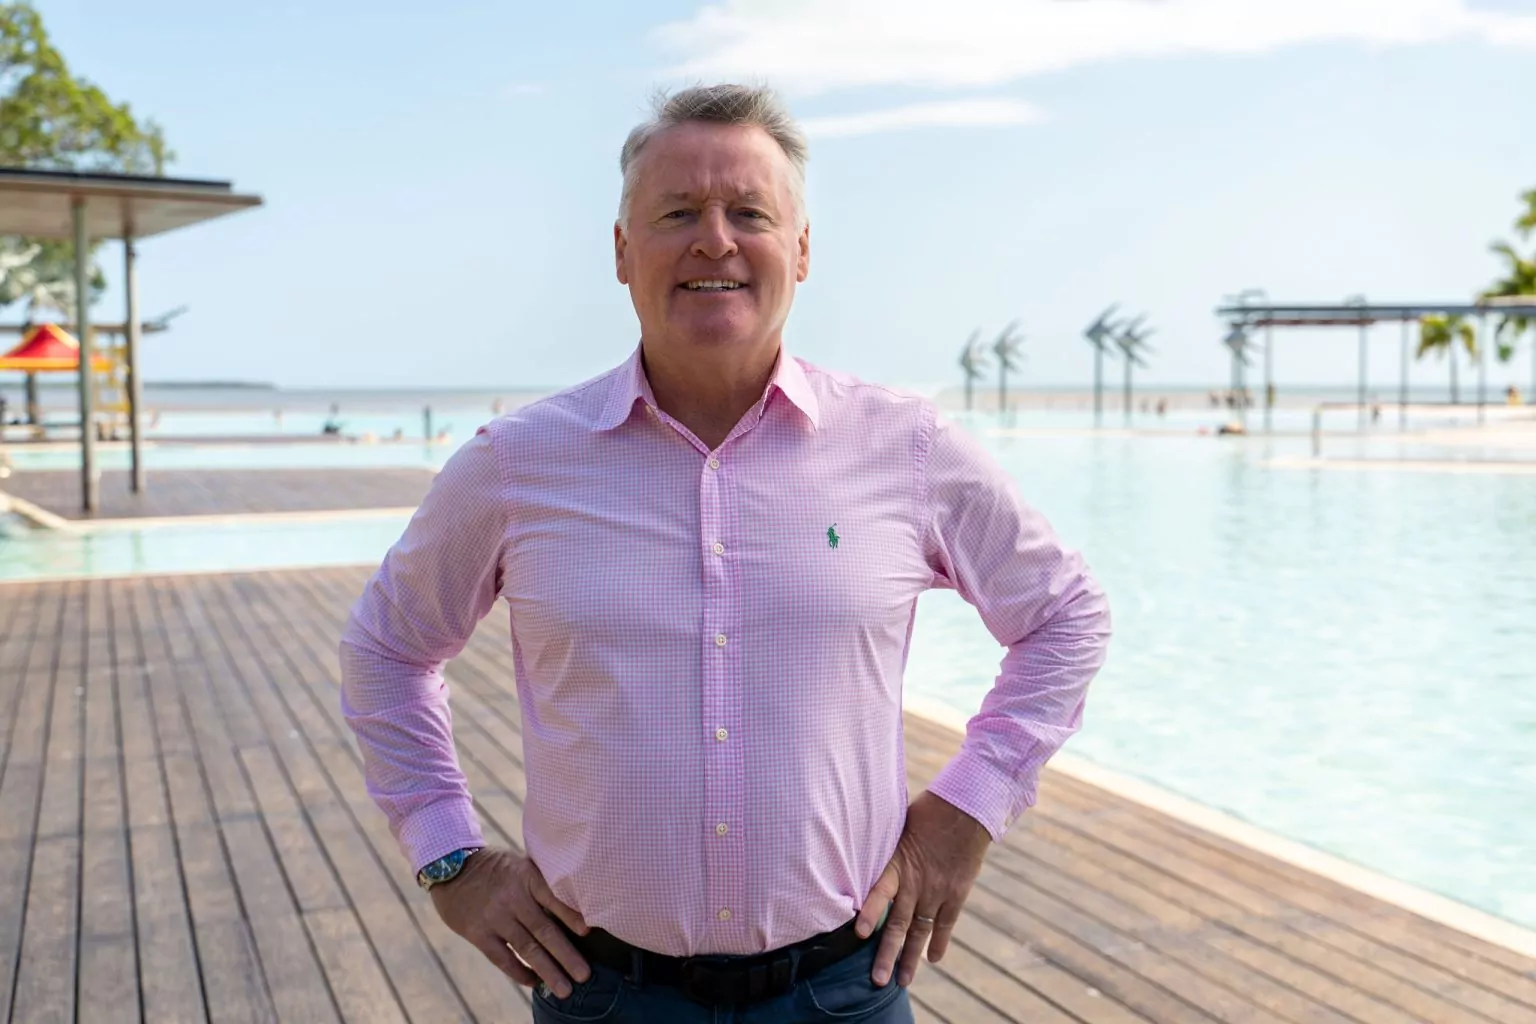  Queensland Tourism Minister and State Member for Cairns, Michael Healy